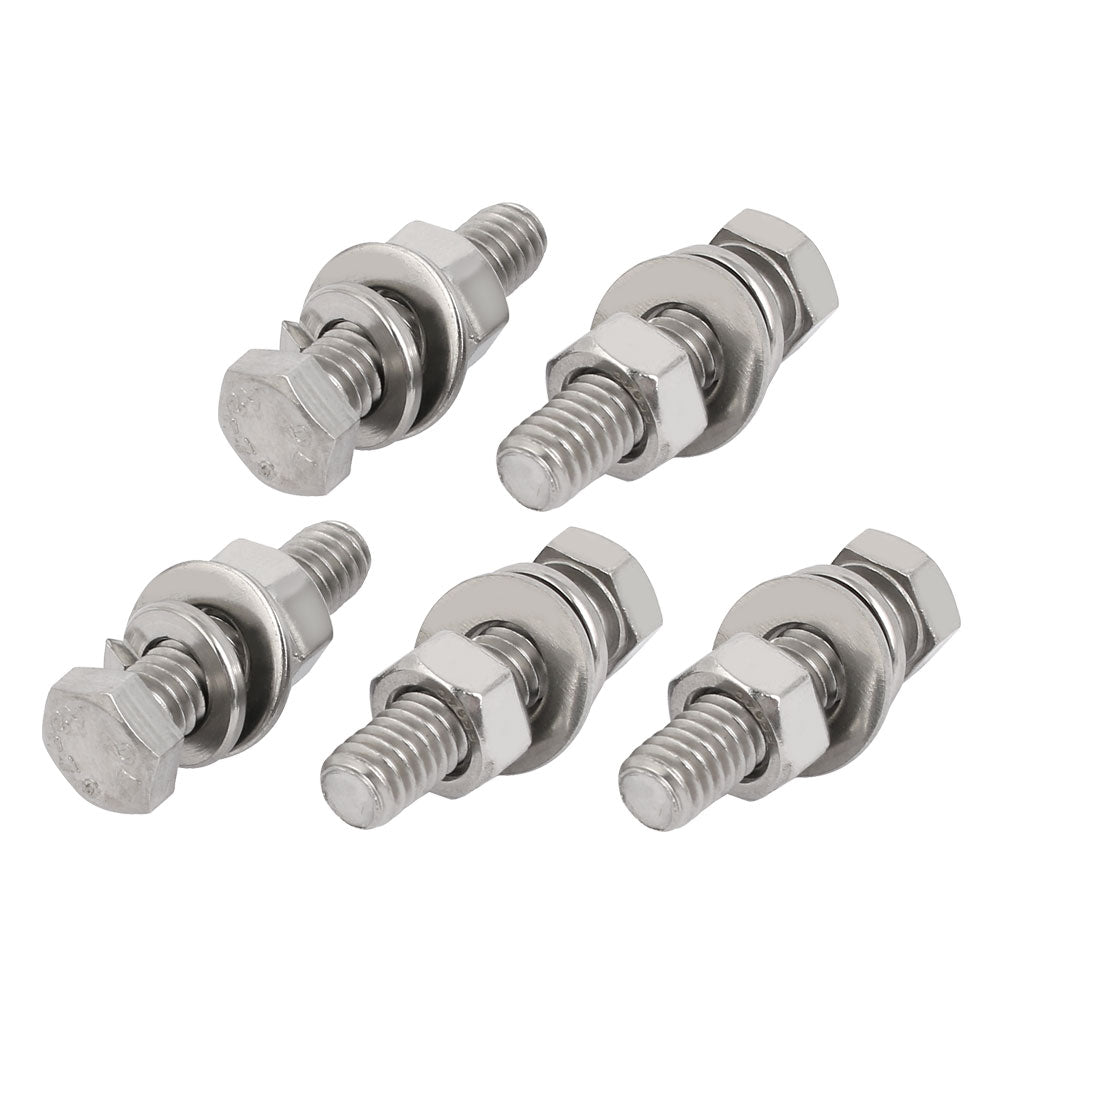 uxcell Uxcell 5Set 304 Stainless Steel 5/16"-18 Thread 1-1/2" Length Hex Bolt Kit w Washer Nut